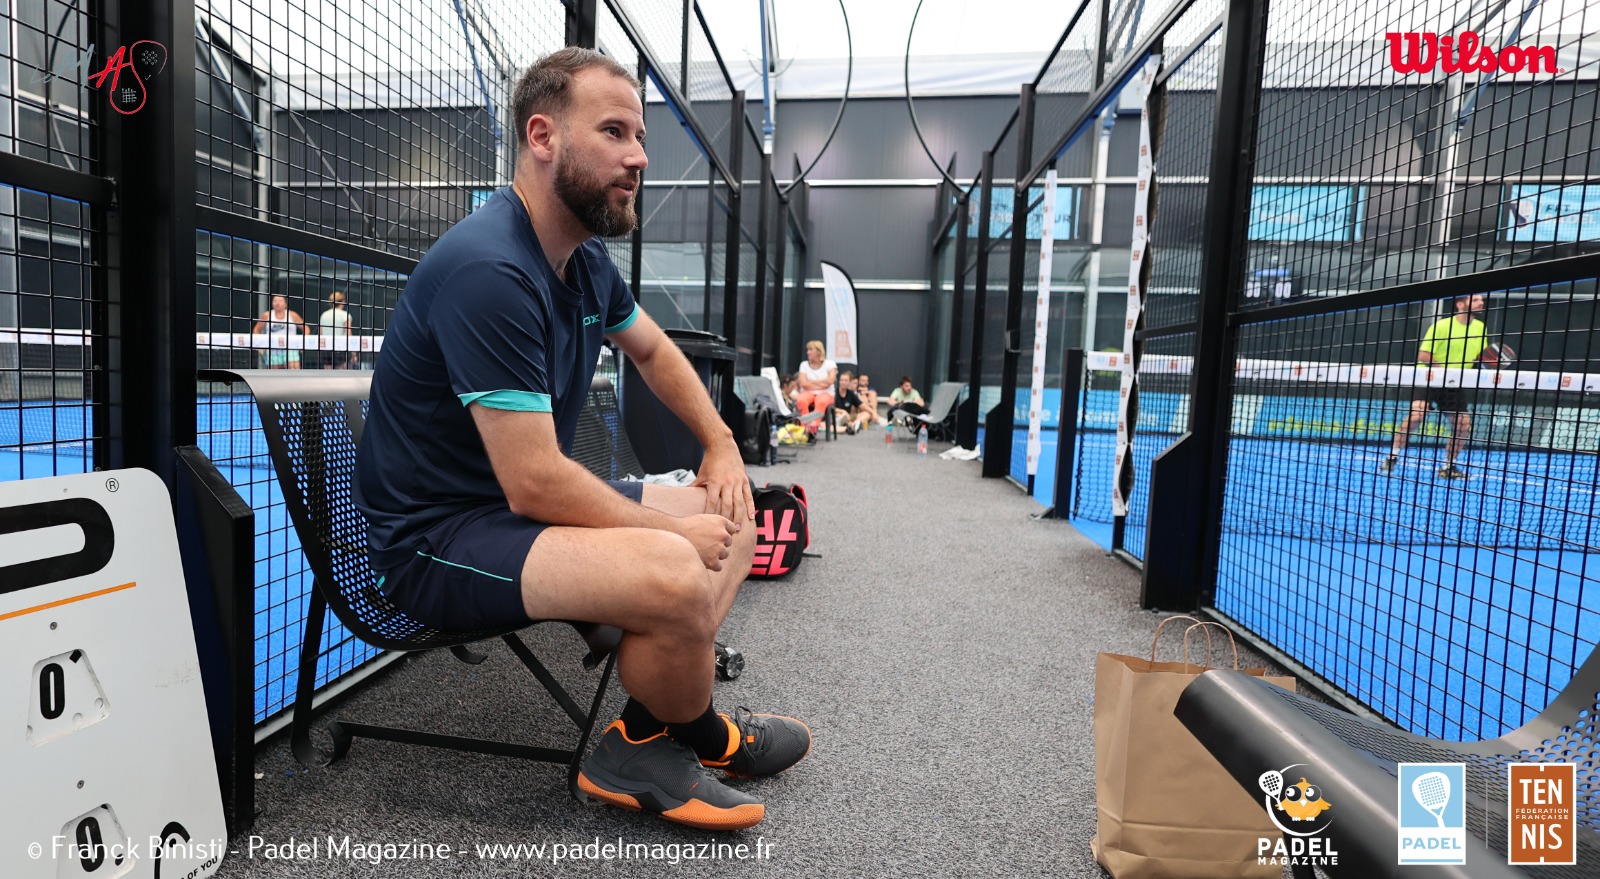 FFT Padel Tour Perpignan: Maigret and Peyrou forced to retire